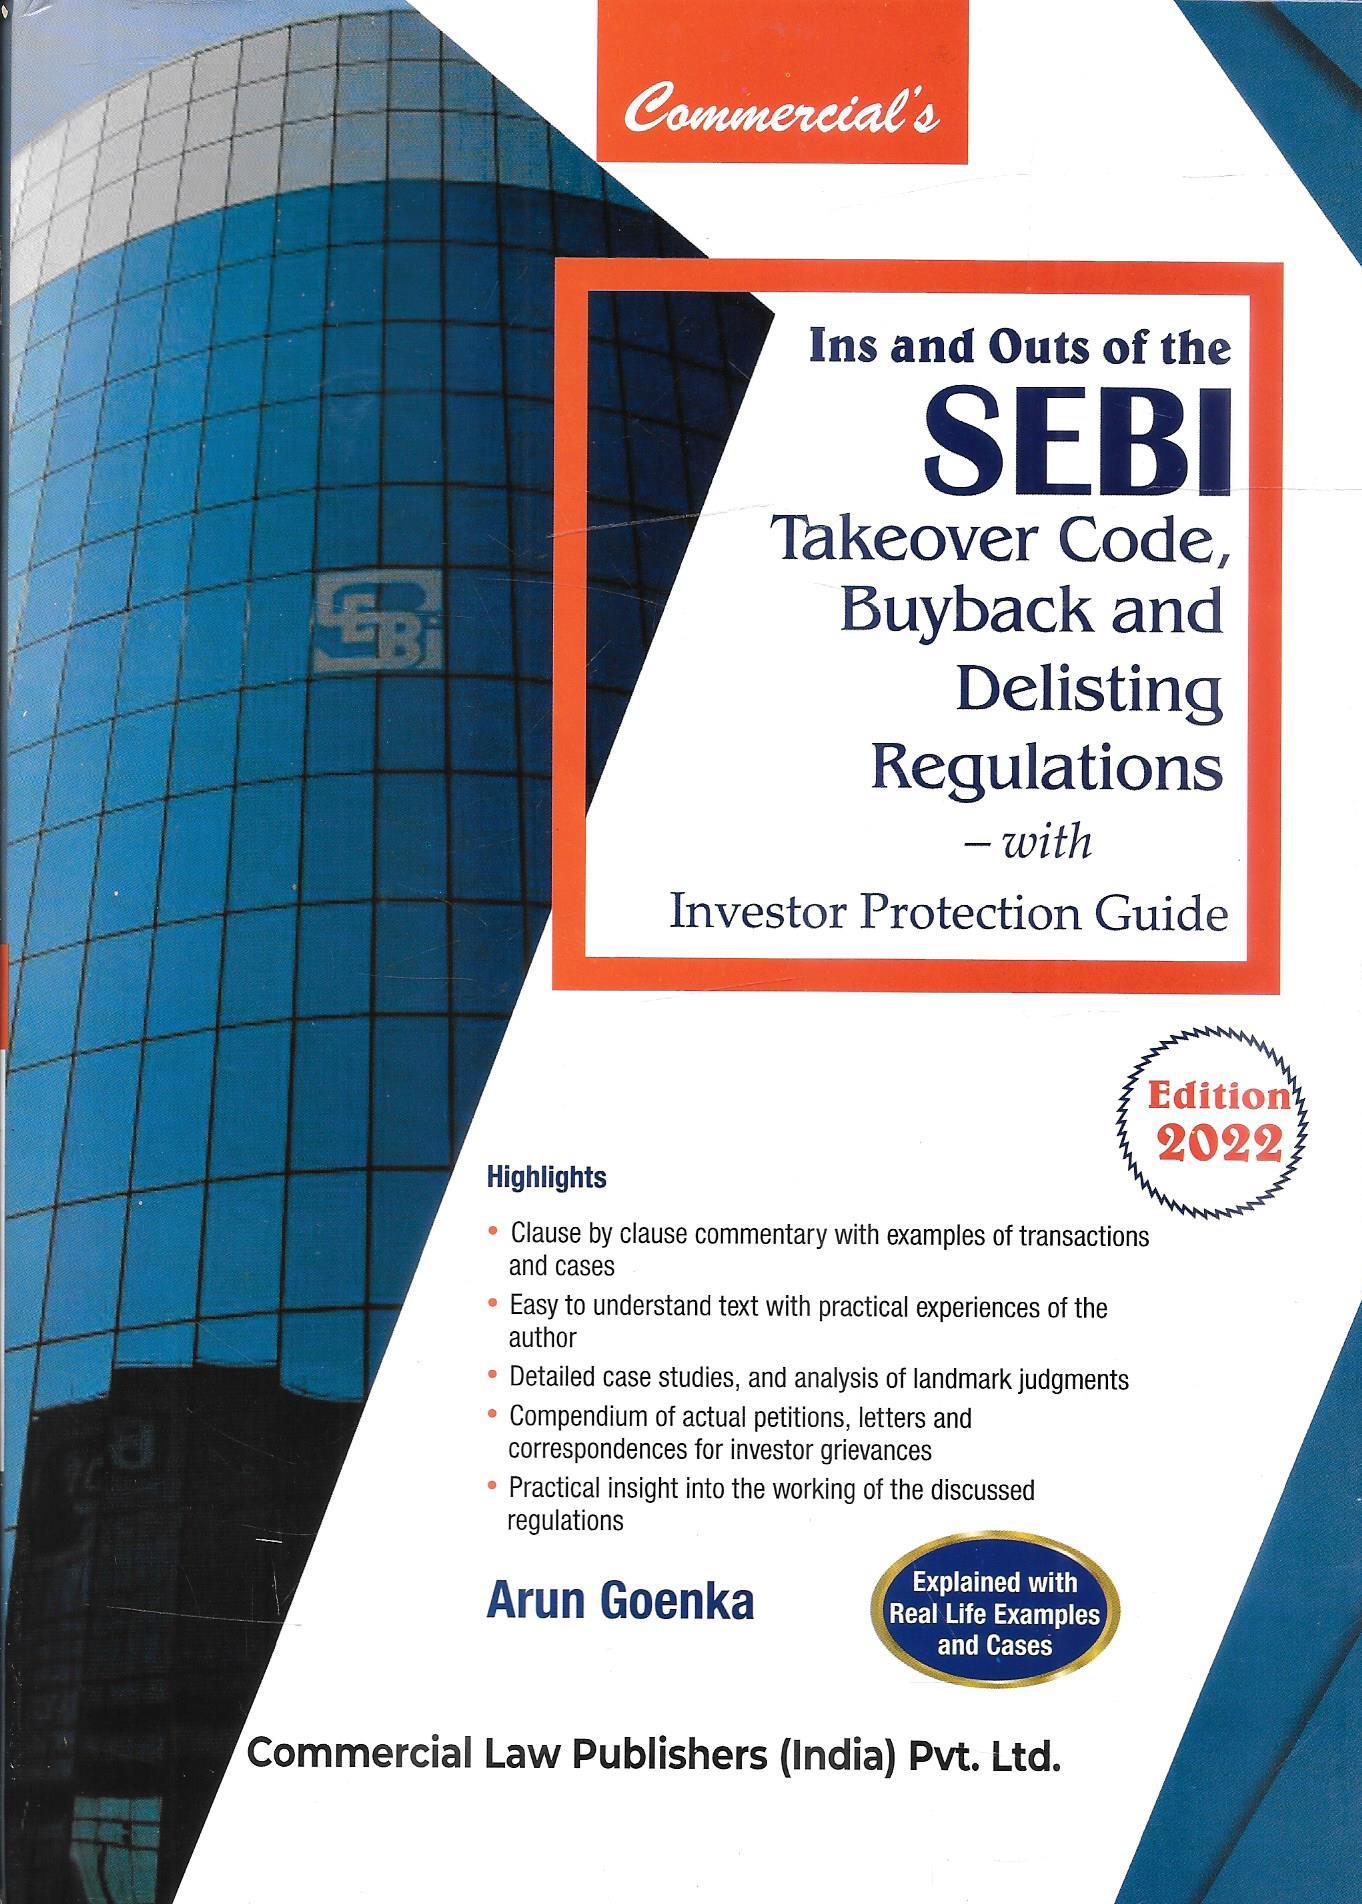 Ins and Outs of the SEBI, Takeover Code, Buyback and Delisting Regulations with Investor Protection Guide